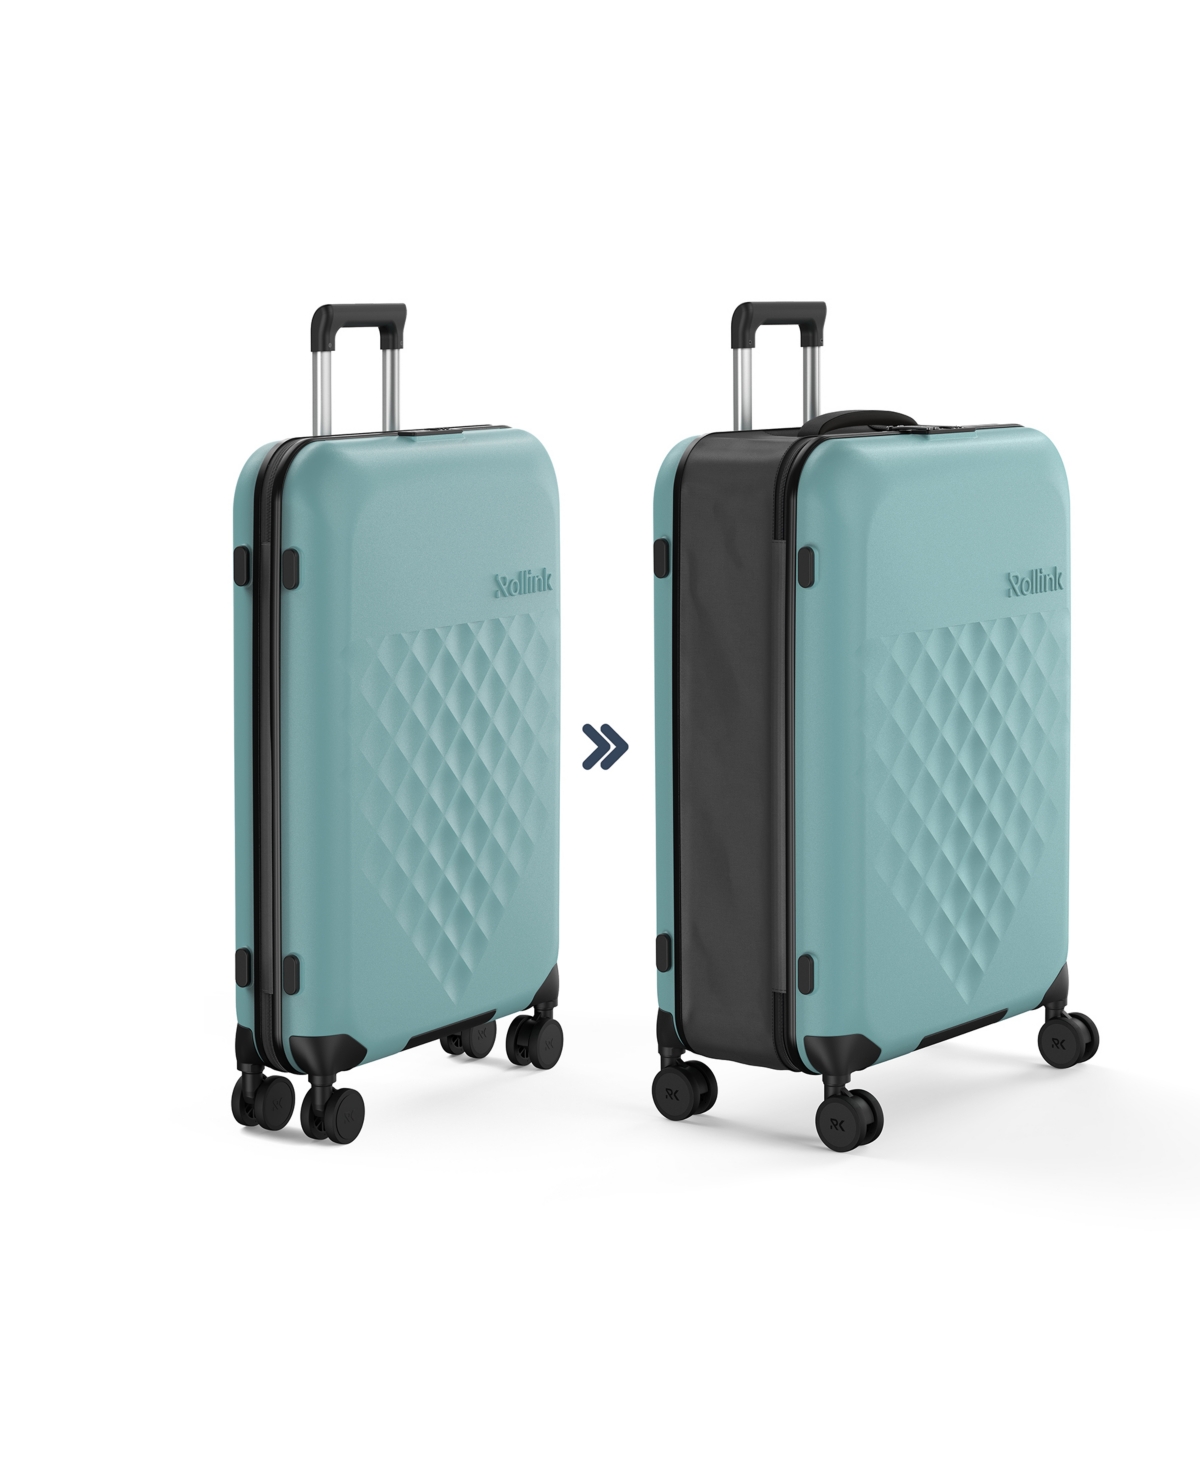 Rollink Flex 360 Large 29" Check-in Spinner Suitcase In Aqua